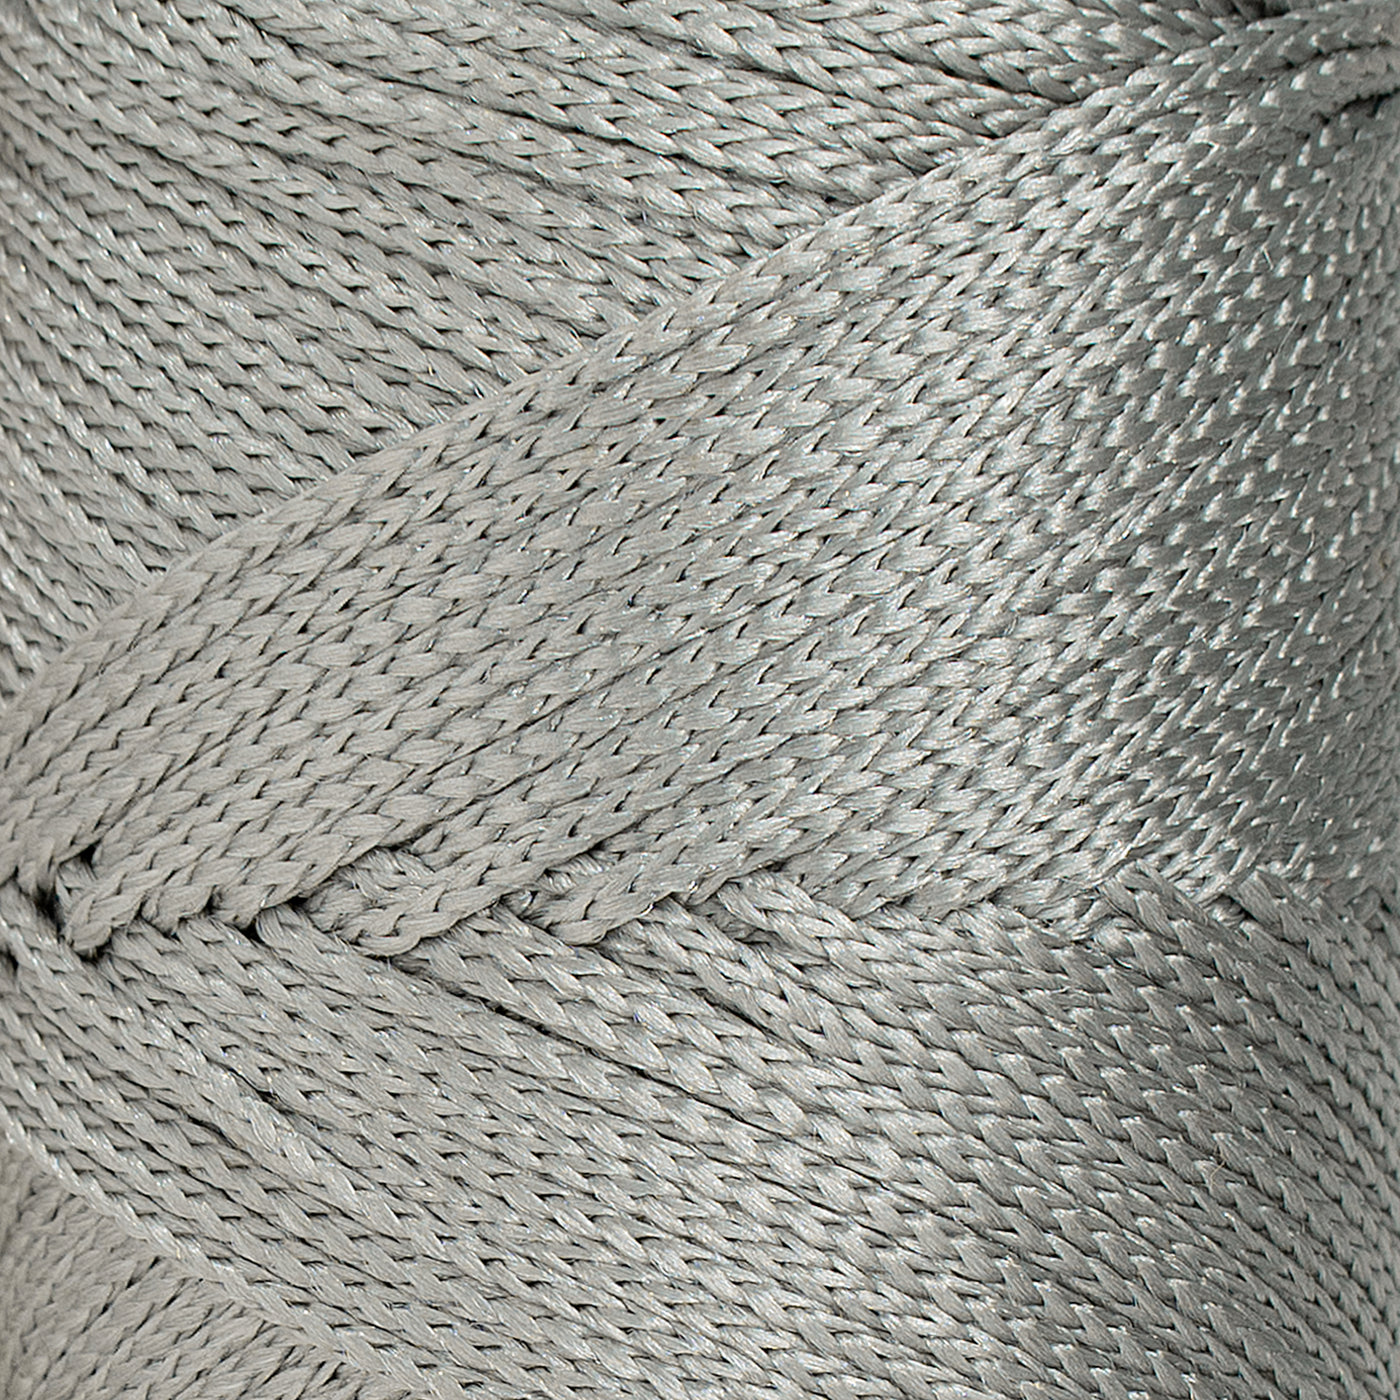 Outdoor 3 mm Macrame Braided Cord – Soft Gray Color